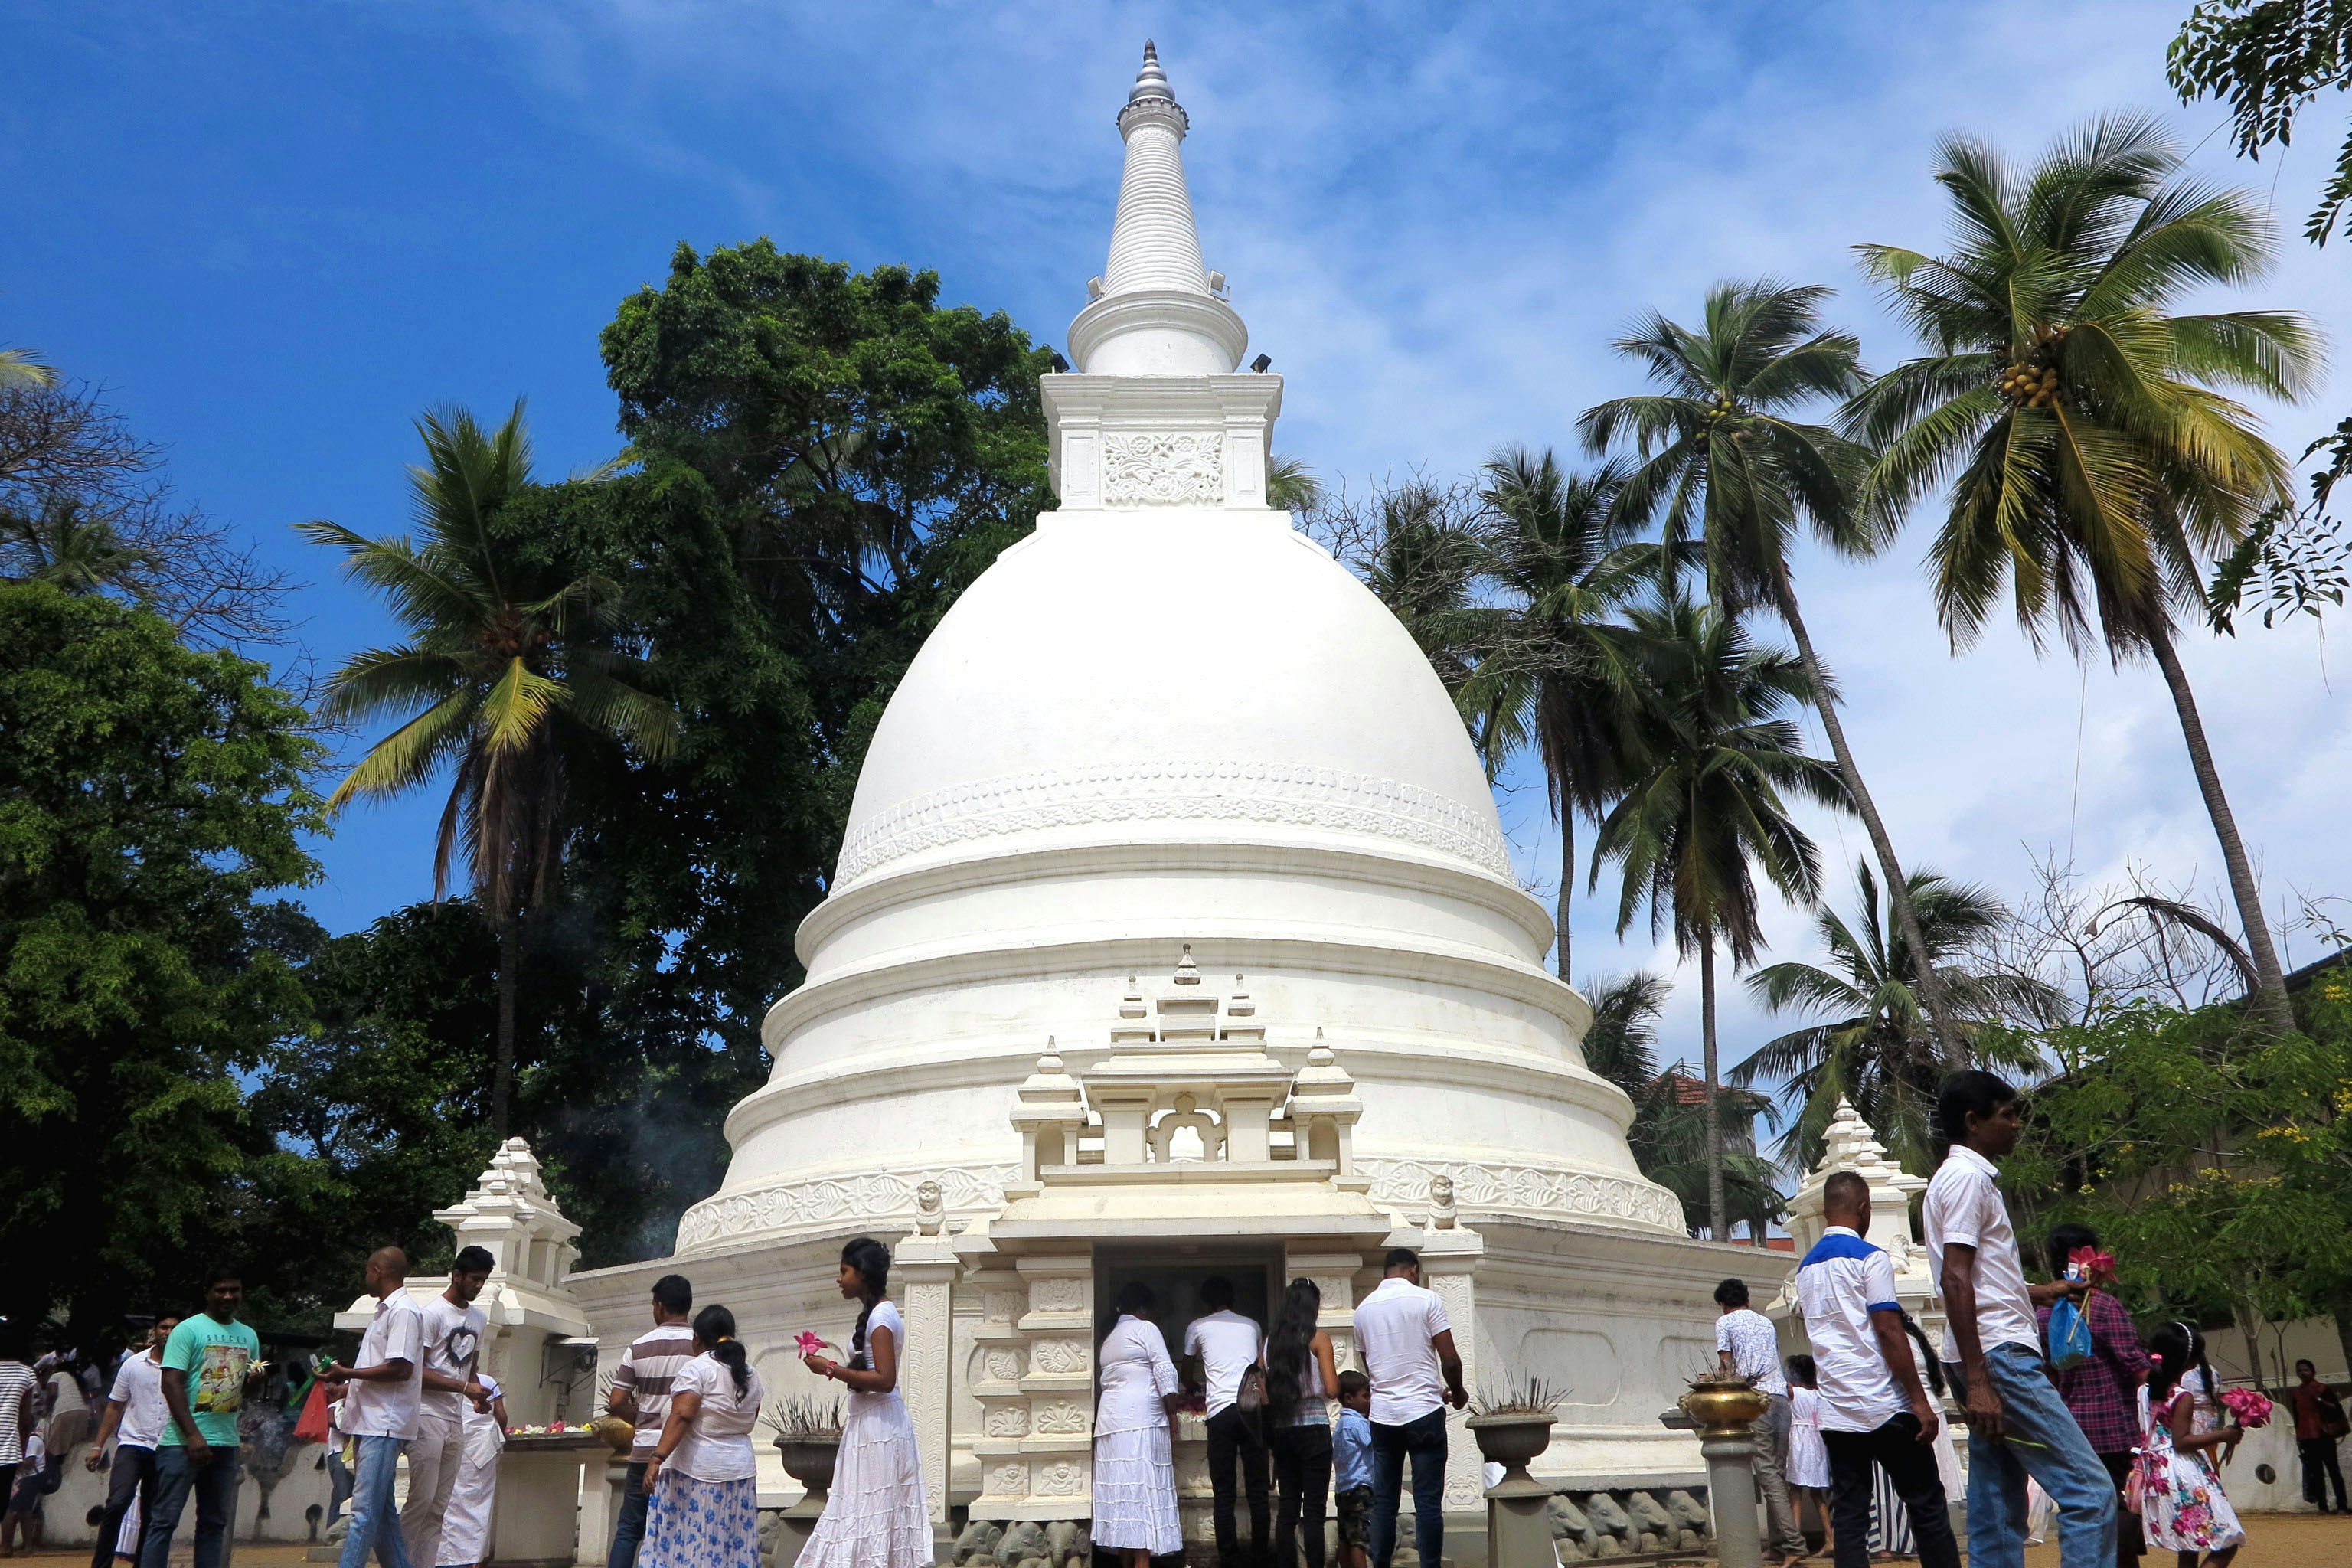 The gleaming white dagoba at Bellanwala © Natalie Blow / Lonely Planet